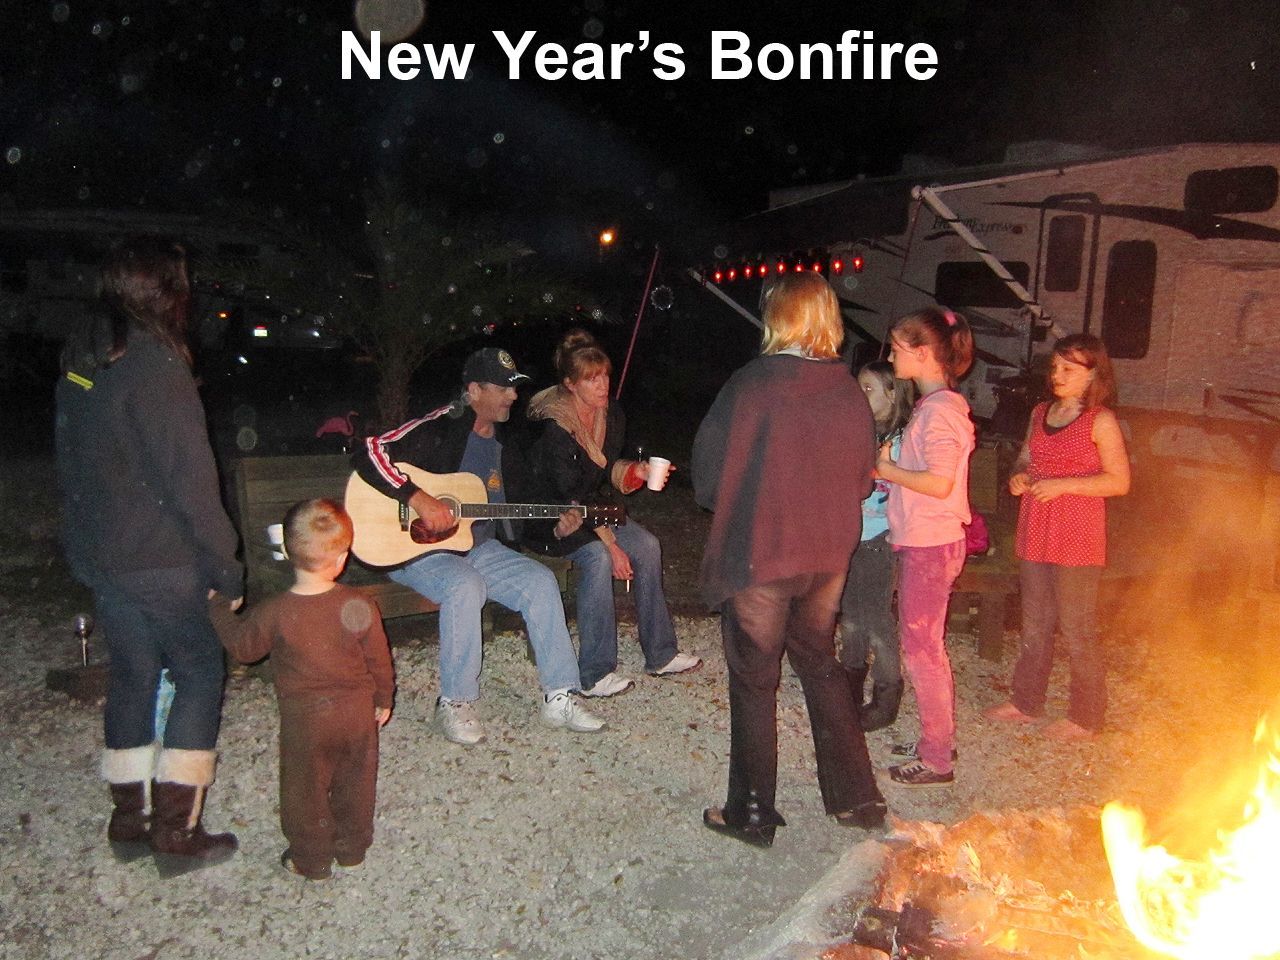 a group of people gathered around a bonfire with the caption new year 's bonfire